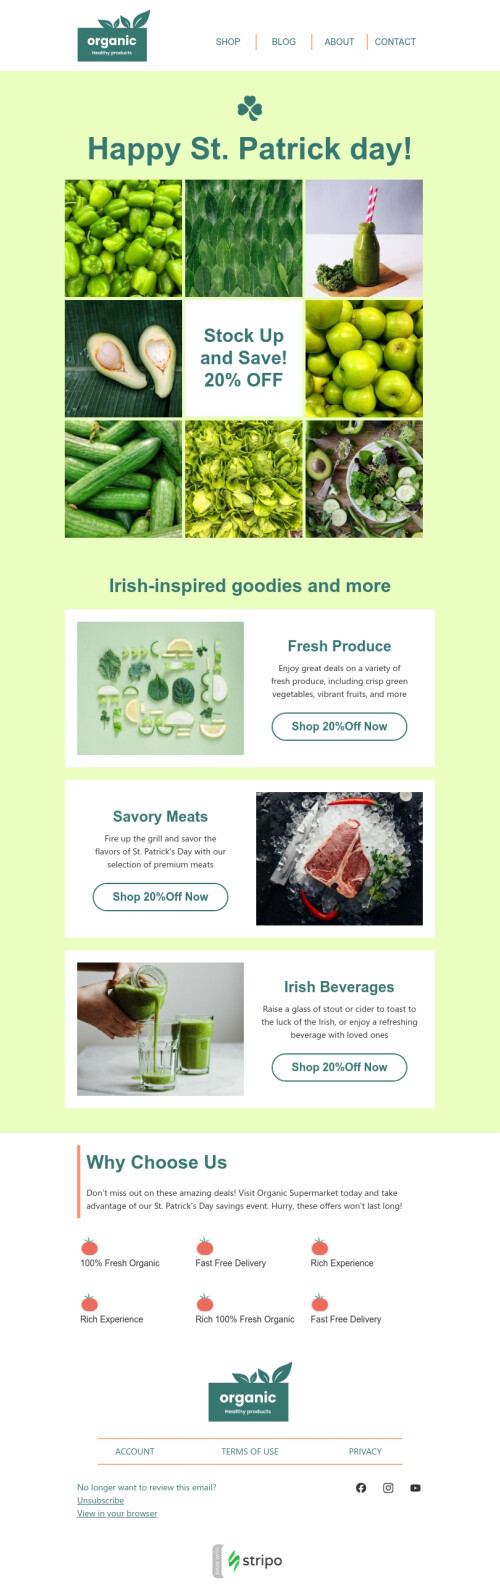 St. Patrick's Day email template "Stock up and save" for food industry desktop view